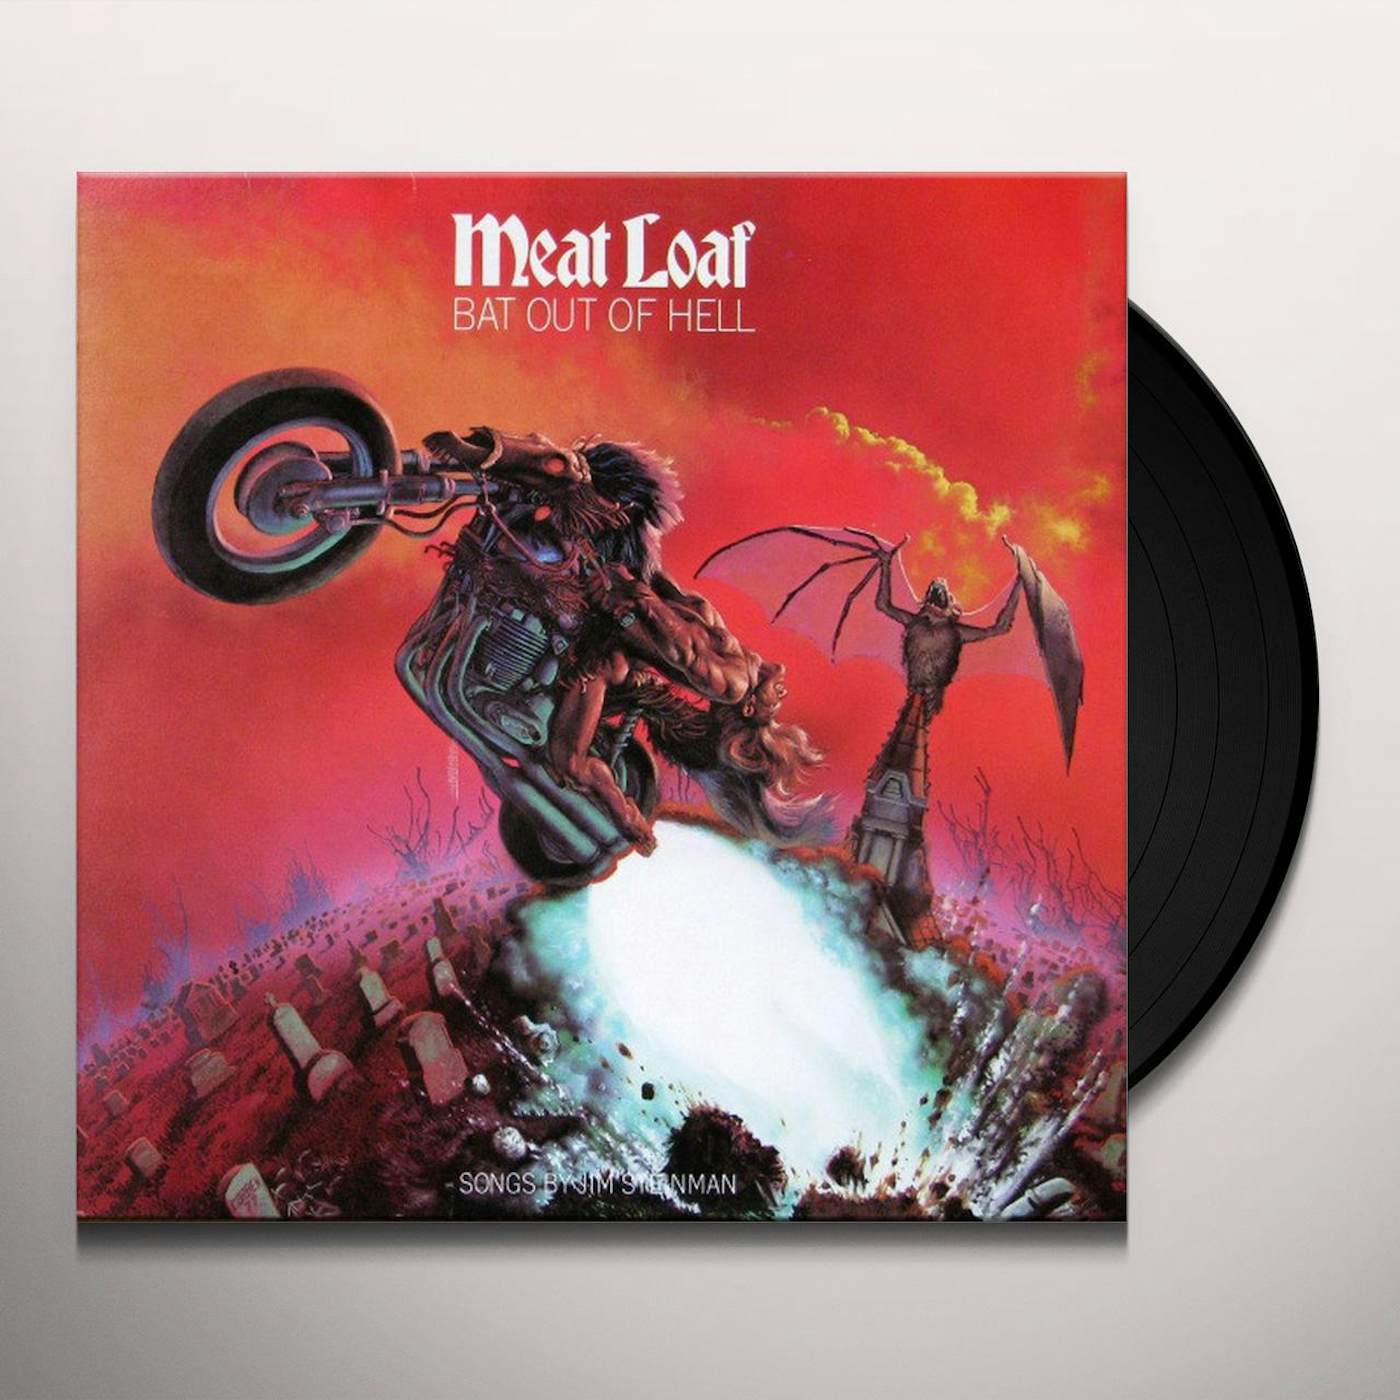 Meat Loaf BAT OUT OF HELL (CLEAR CLASSIC VINYL) Vinyl Record